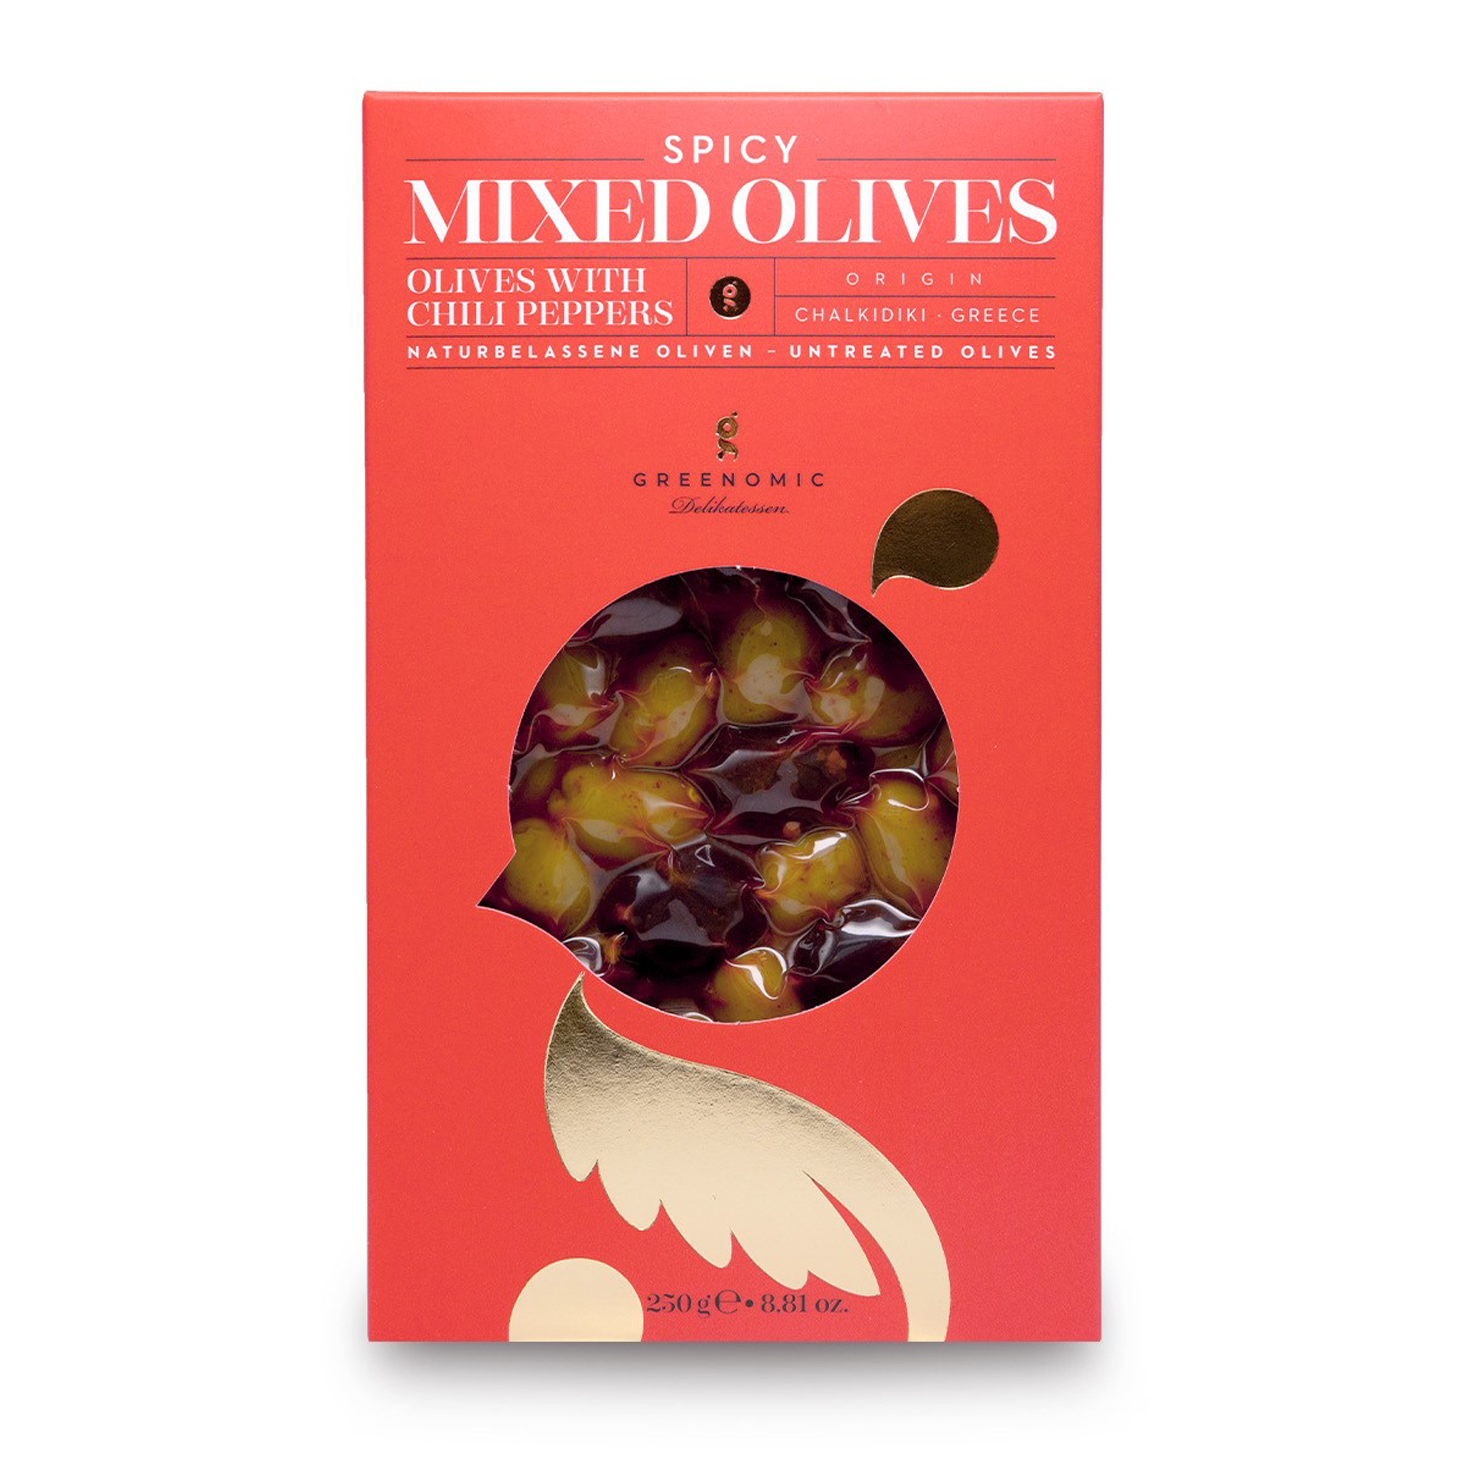 Oliven Spicy Mixed Olives 250g